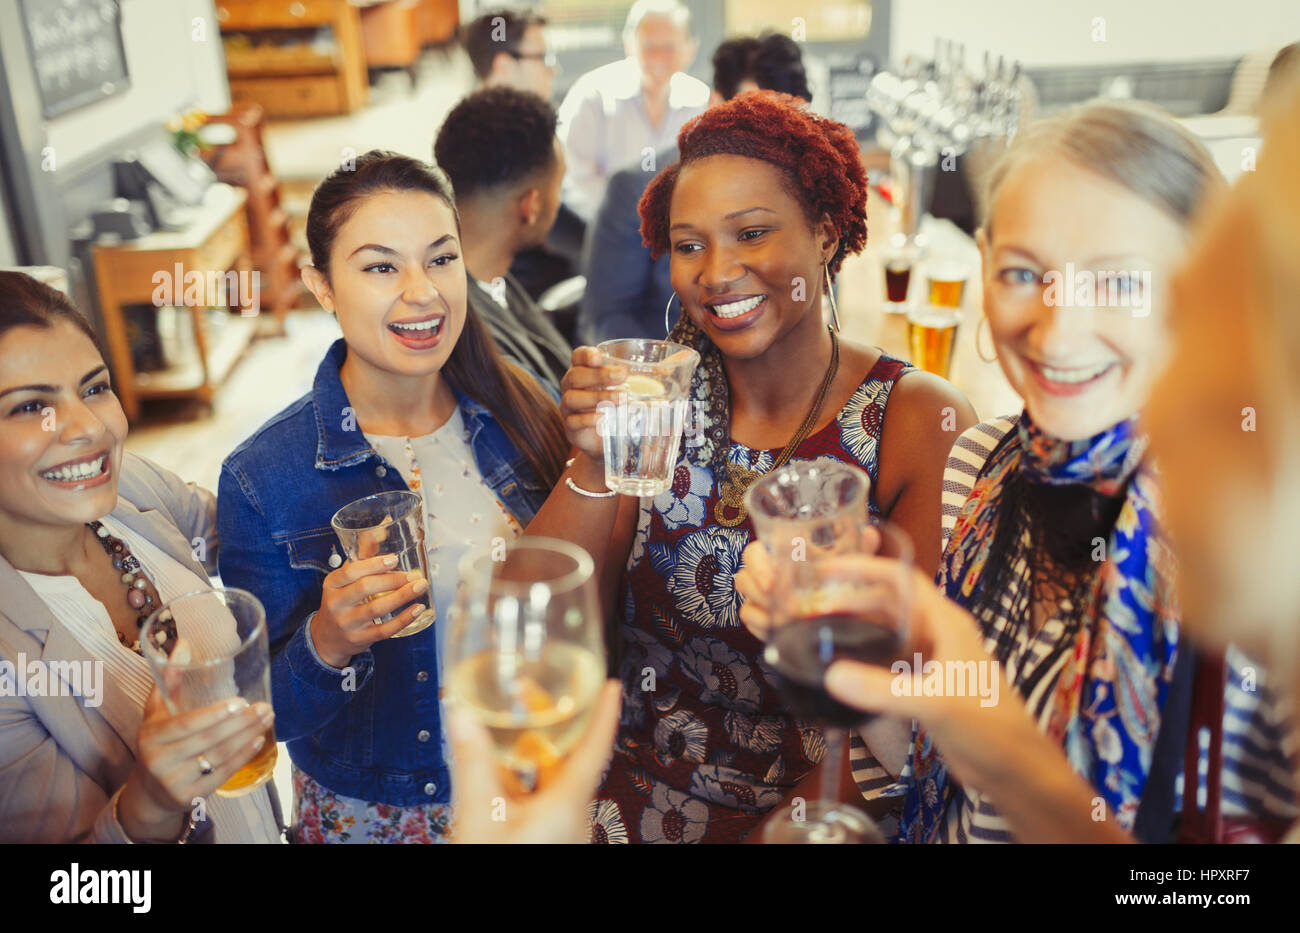 Women friends toasting wine and beer glasses at bar Stock Photo